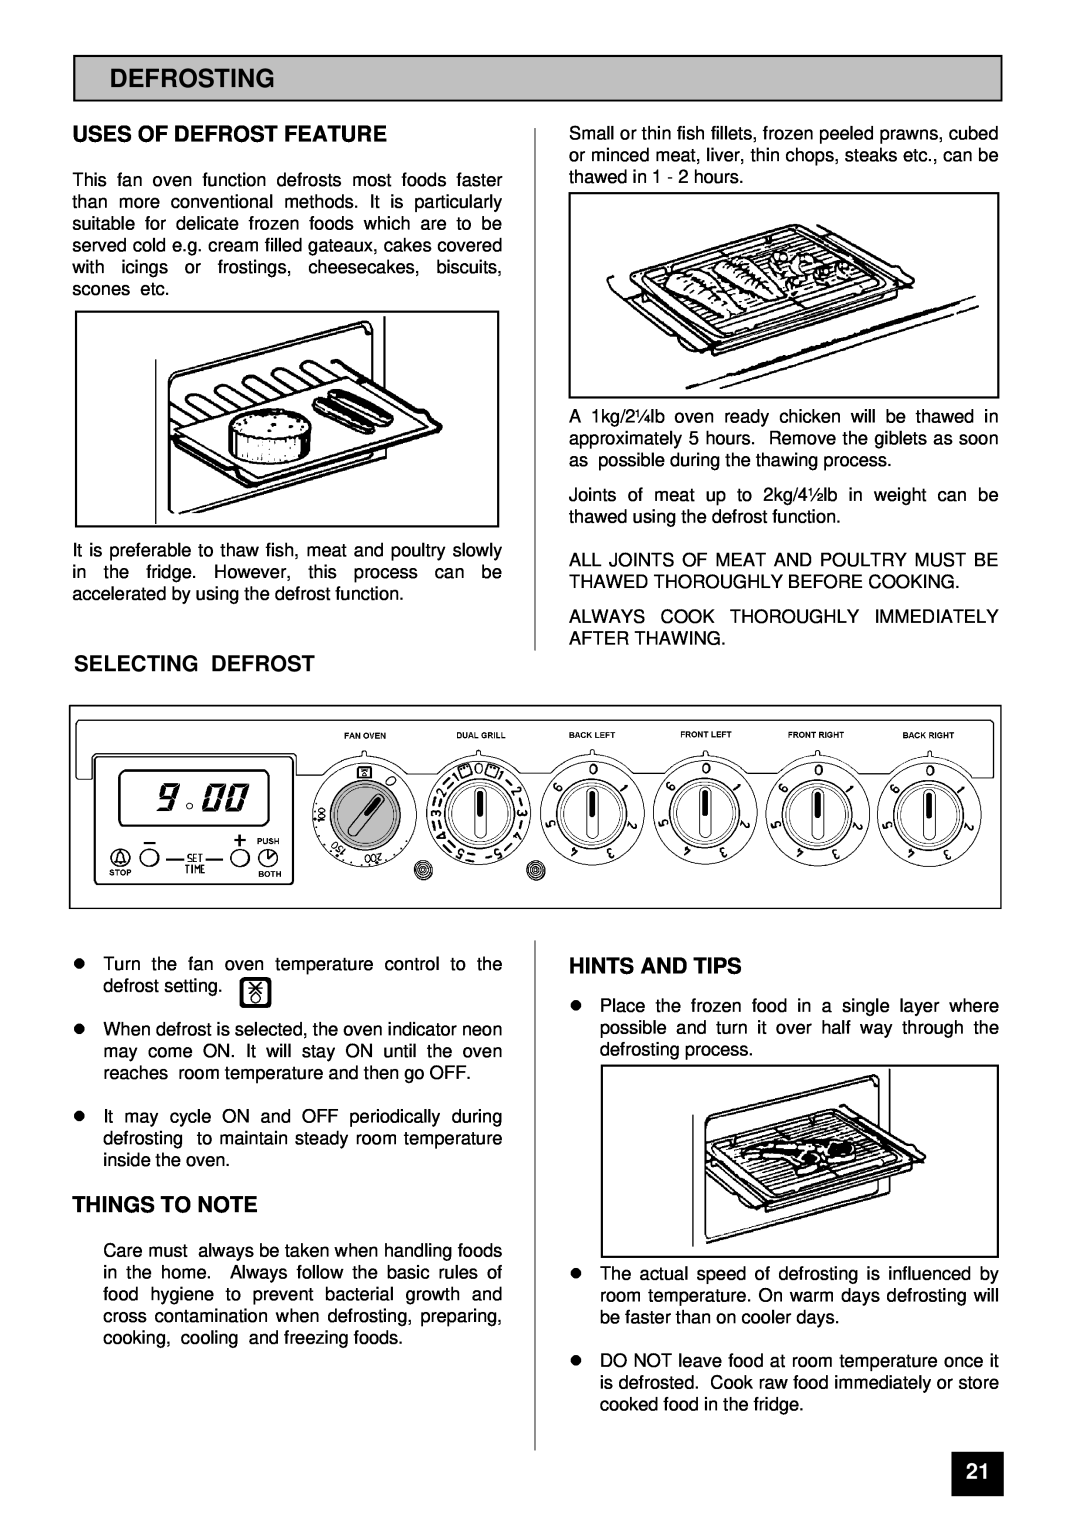 Zanussi ZCE 7300 manual Defrosting, Uses Of Defrost Feature, Selecting Defrost, Things To Note, lHINTS AND TIPS 